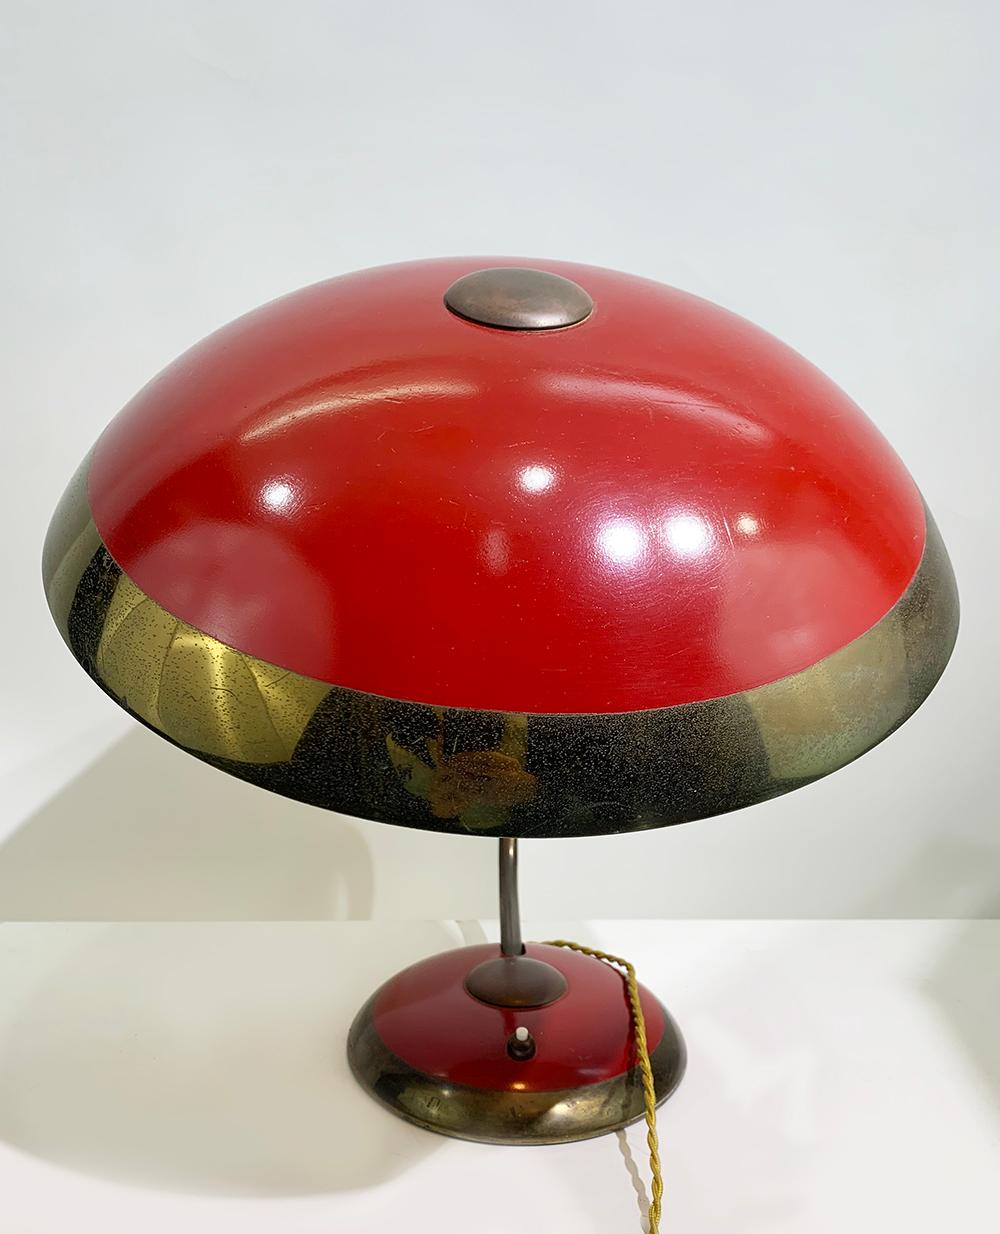 Original unrestored Bauhaus desk/table lamp by Helo Leuchten.
Beautiful red exterior with brass accents. 
Can be delivered and wired for American or European use.